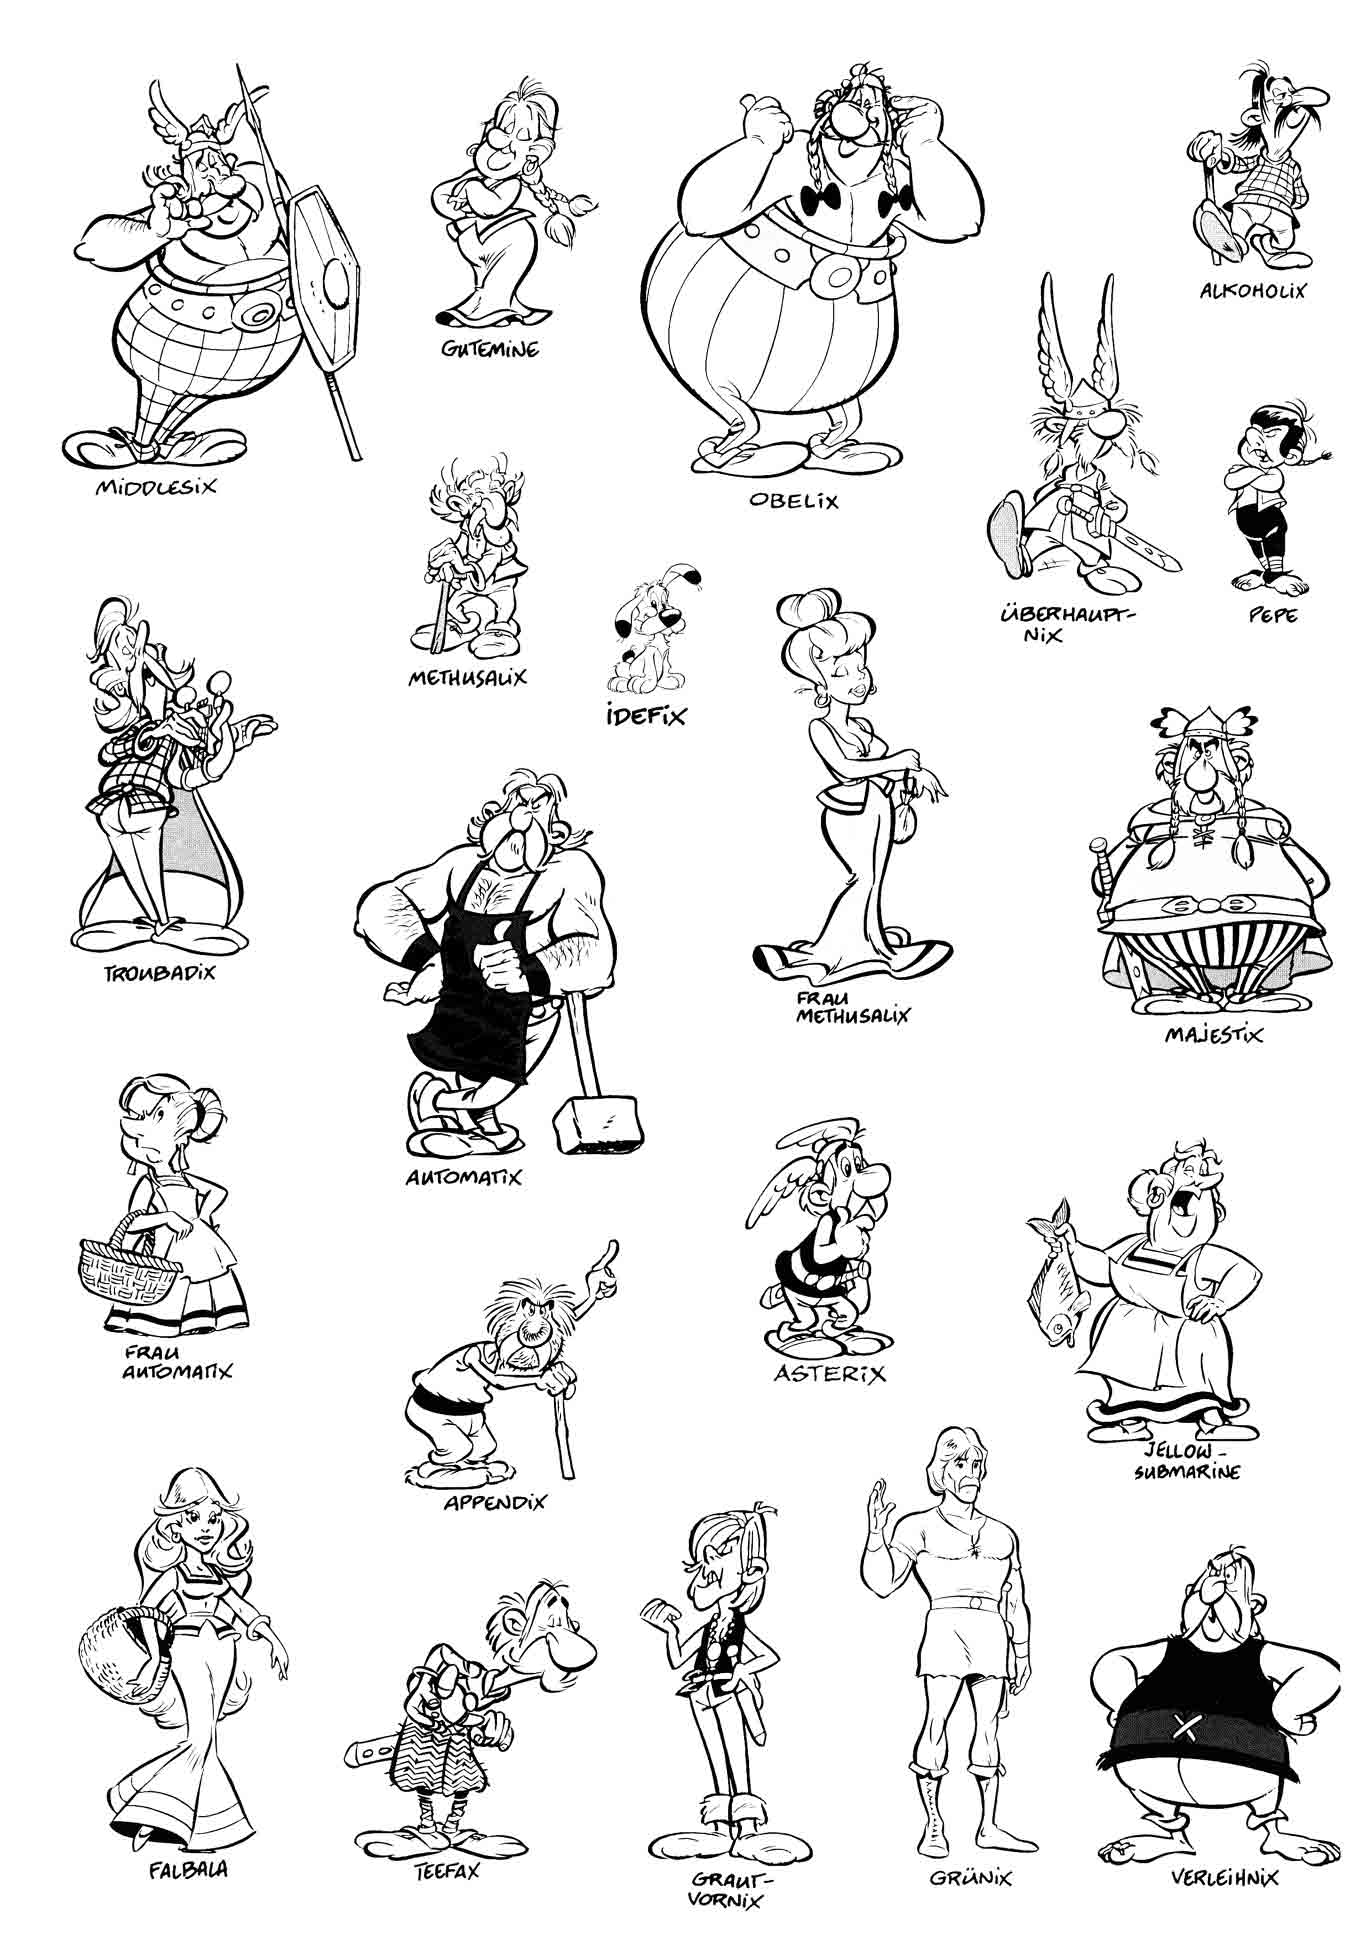 Asterix and obÃ©lix coloring pages - Coloring for kids : coloriages ...